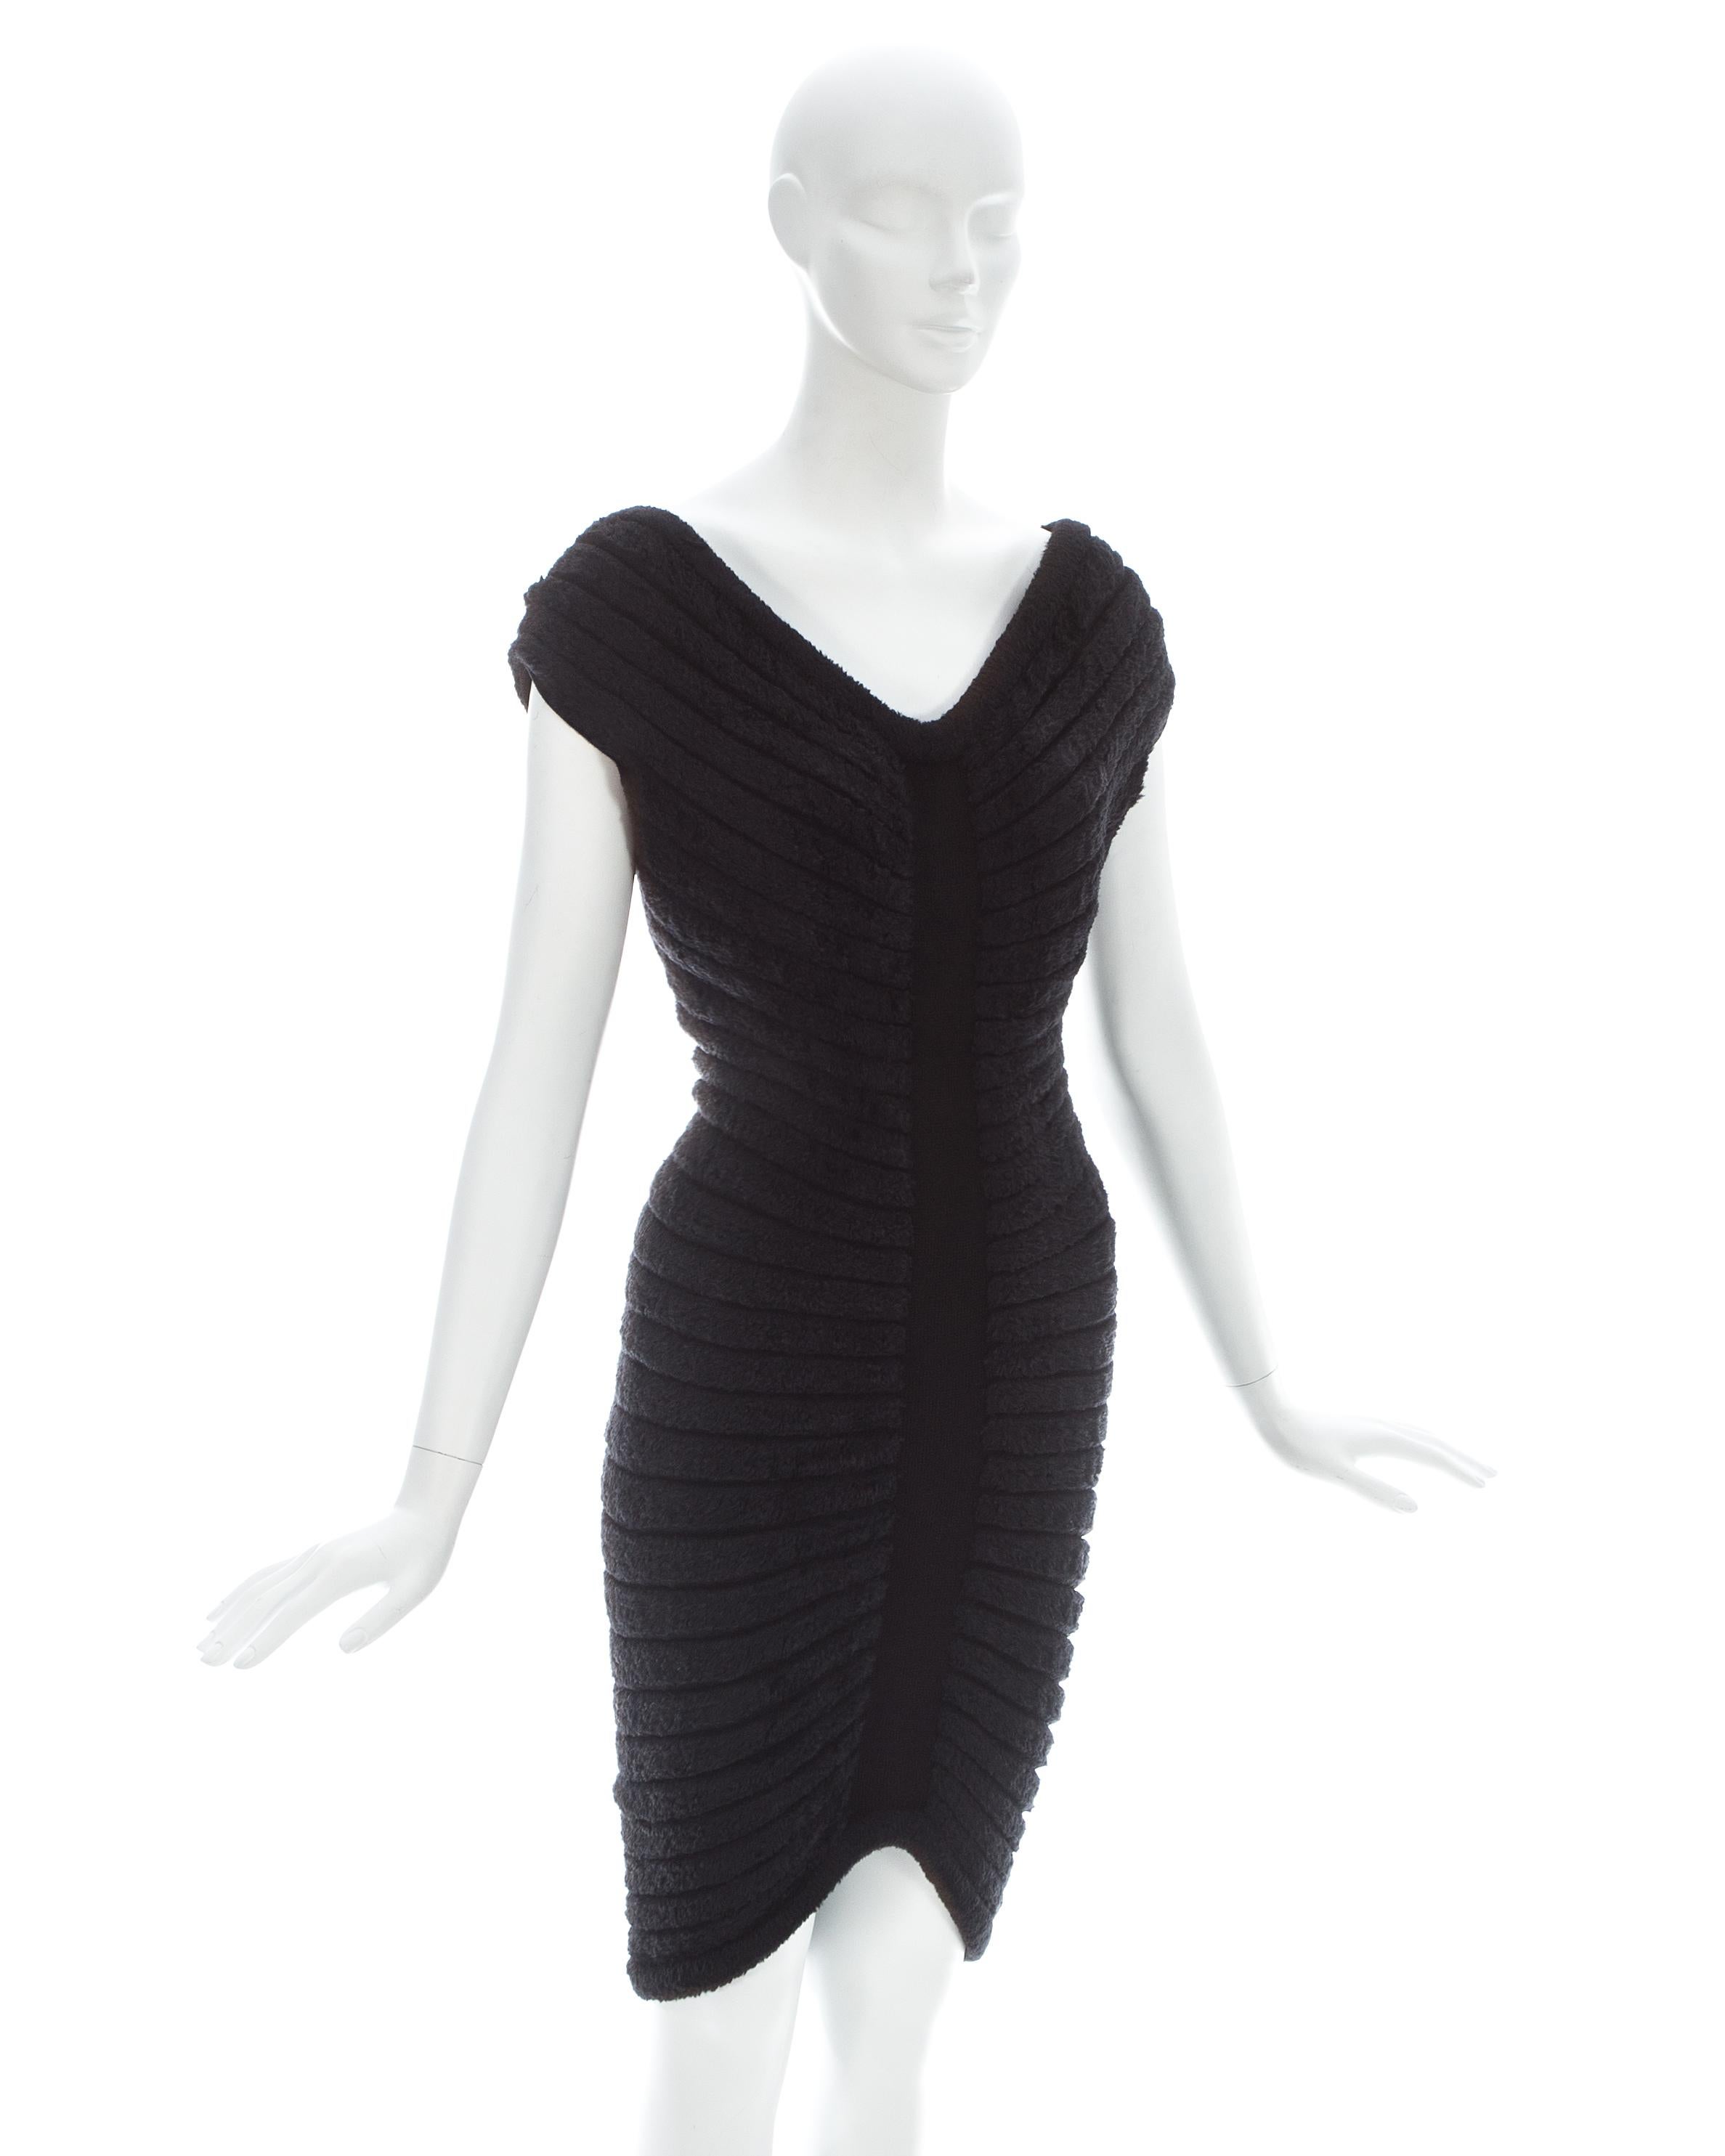 Azzedine Alaia; Black chenille-knitted figure-hugging 'Houpette' dress with radiating concentric chenille bands

Spring-Summer 1994
